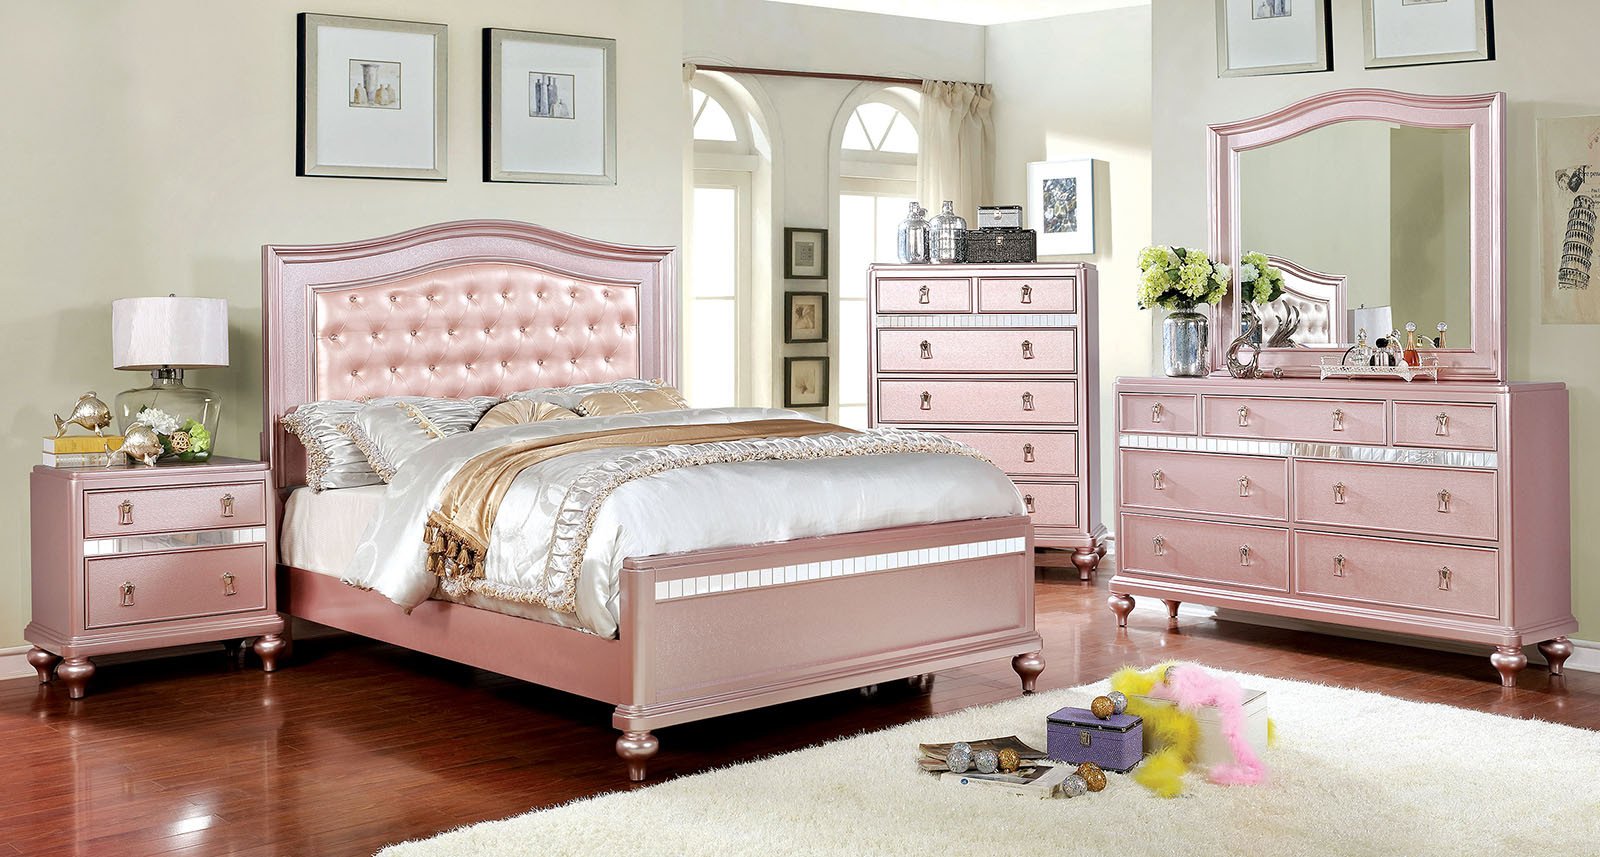 Tufted Queen Bedroom Set New Ariston Rose Gold Finish Queen Size Bed with Mirrored Trim Jeweled button Tufted Padded Leather Headboard